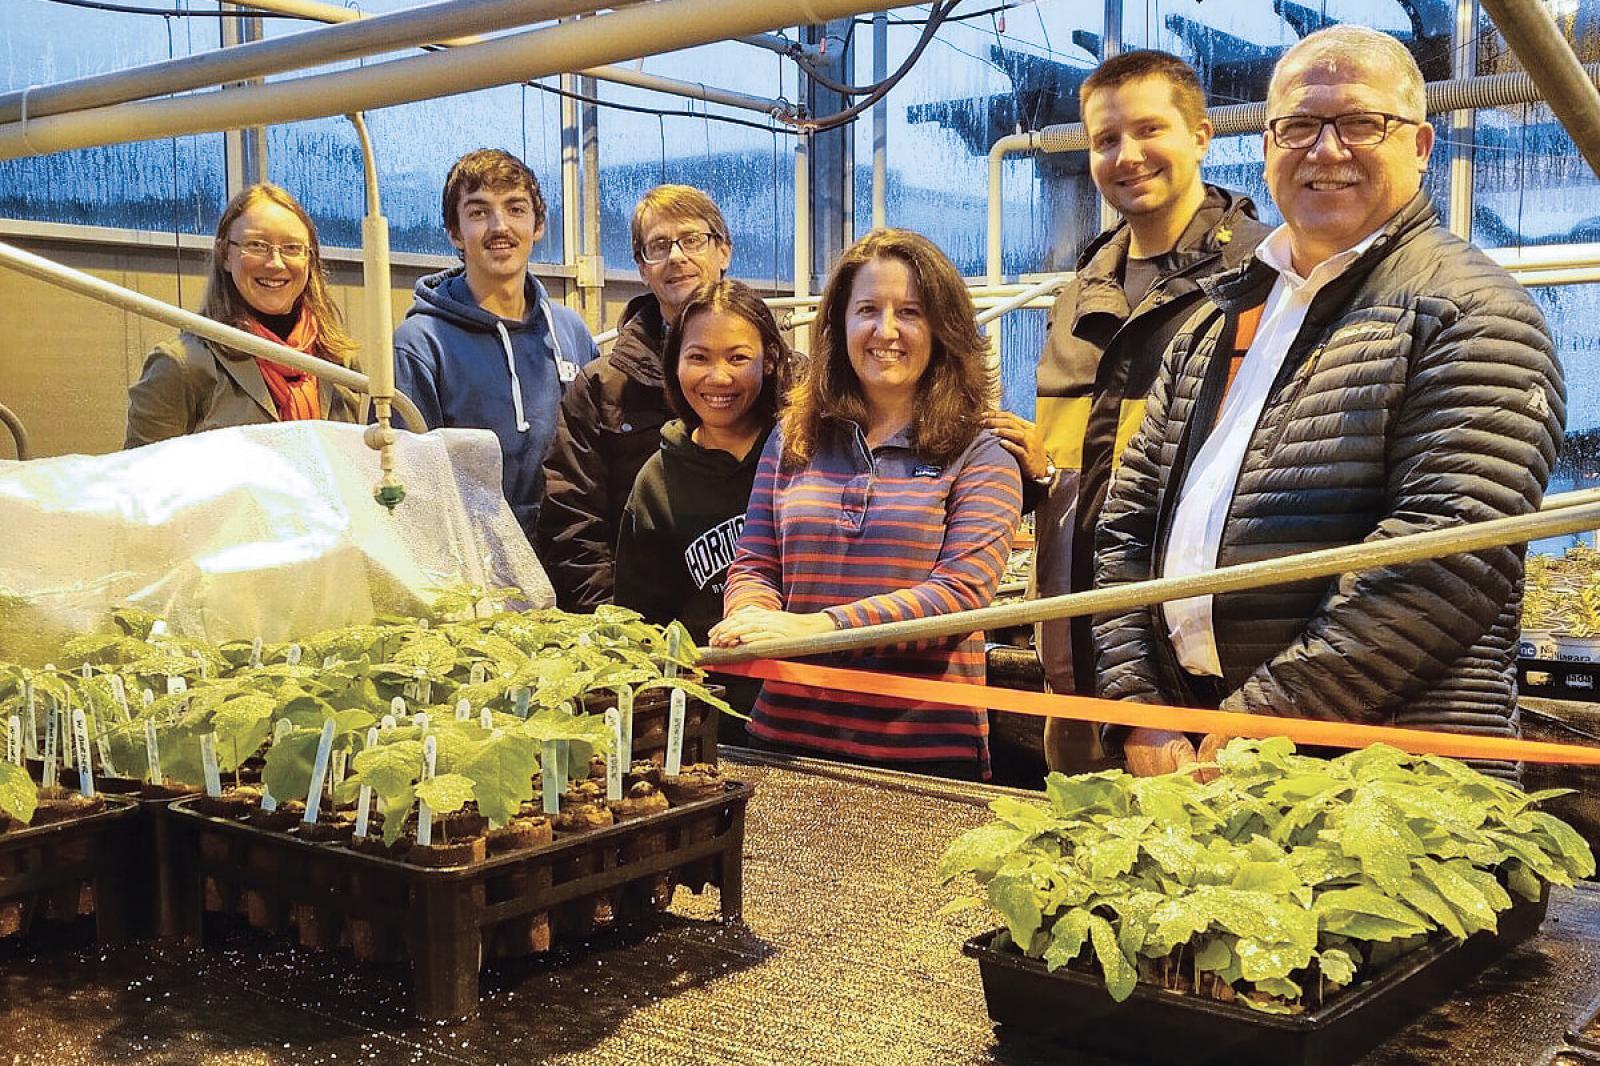 Niagara College students are helping to determine optimal propagation method for oak seedlings.